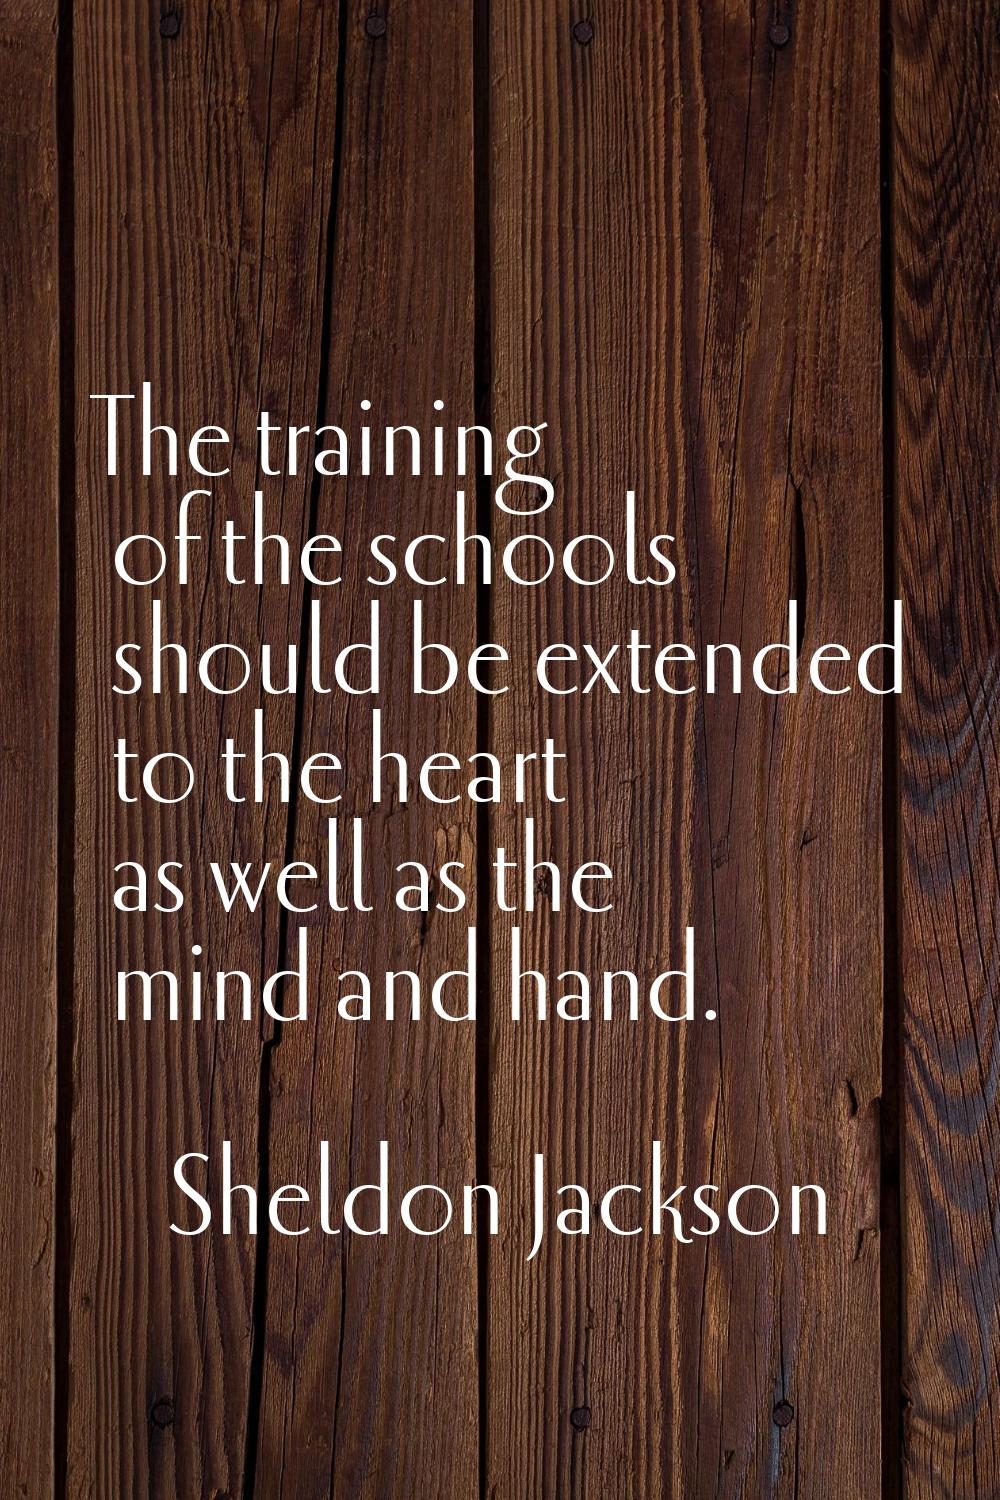 The training of the schools should be extended to the heart as well as the mind and hand.